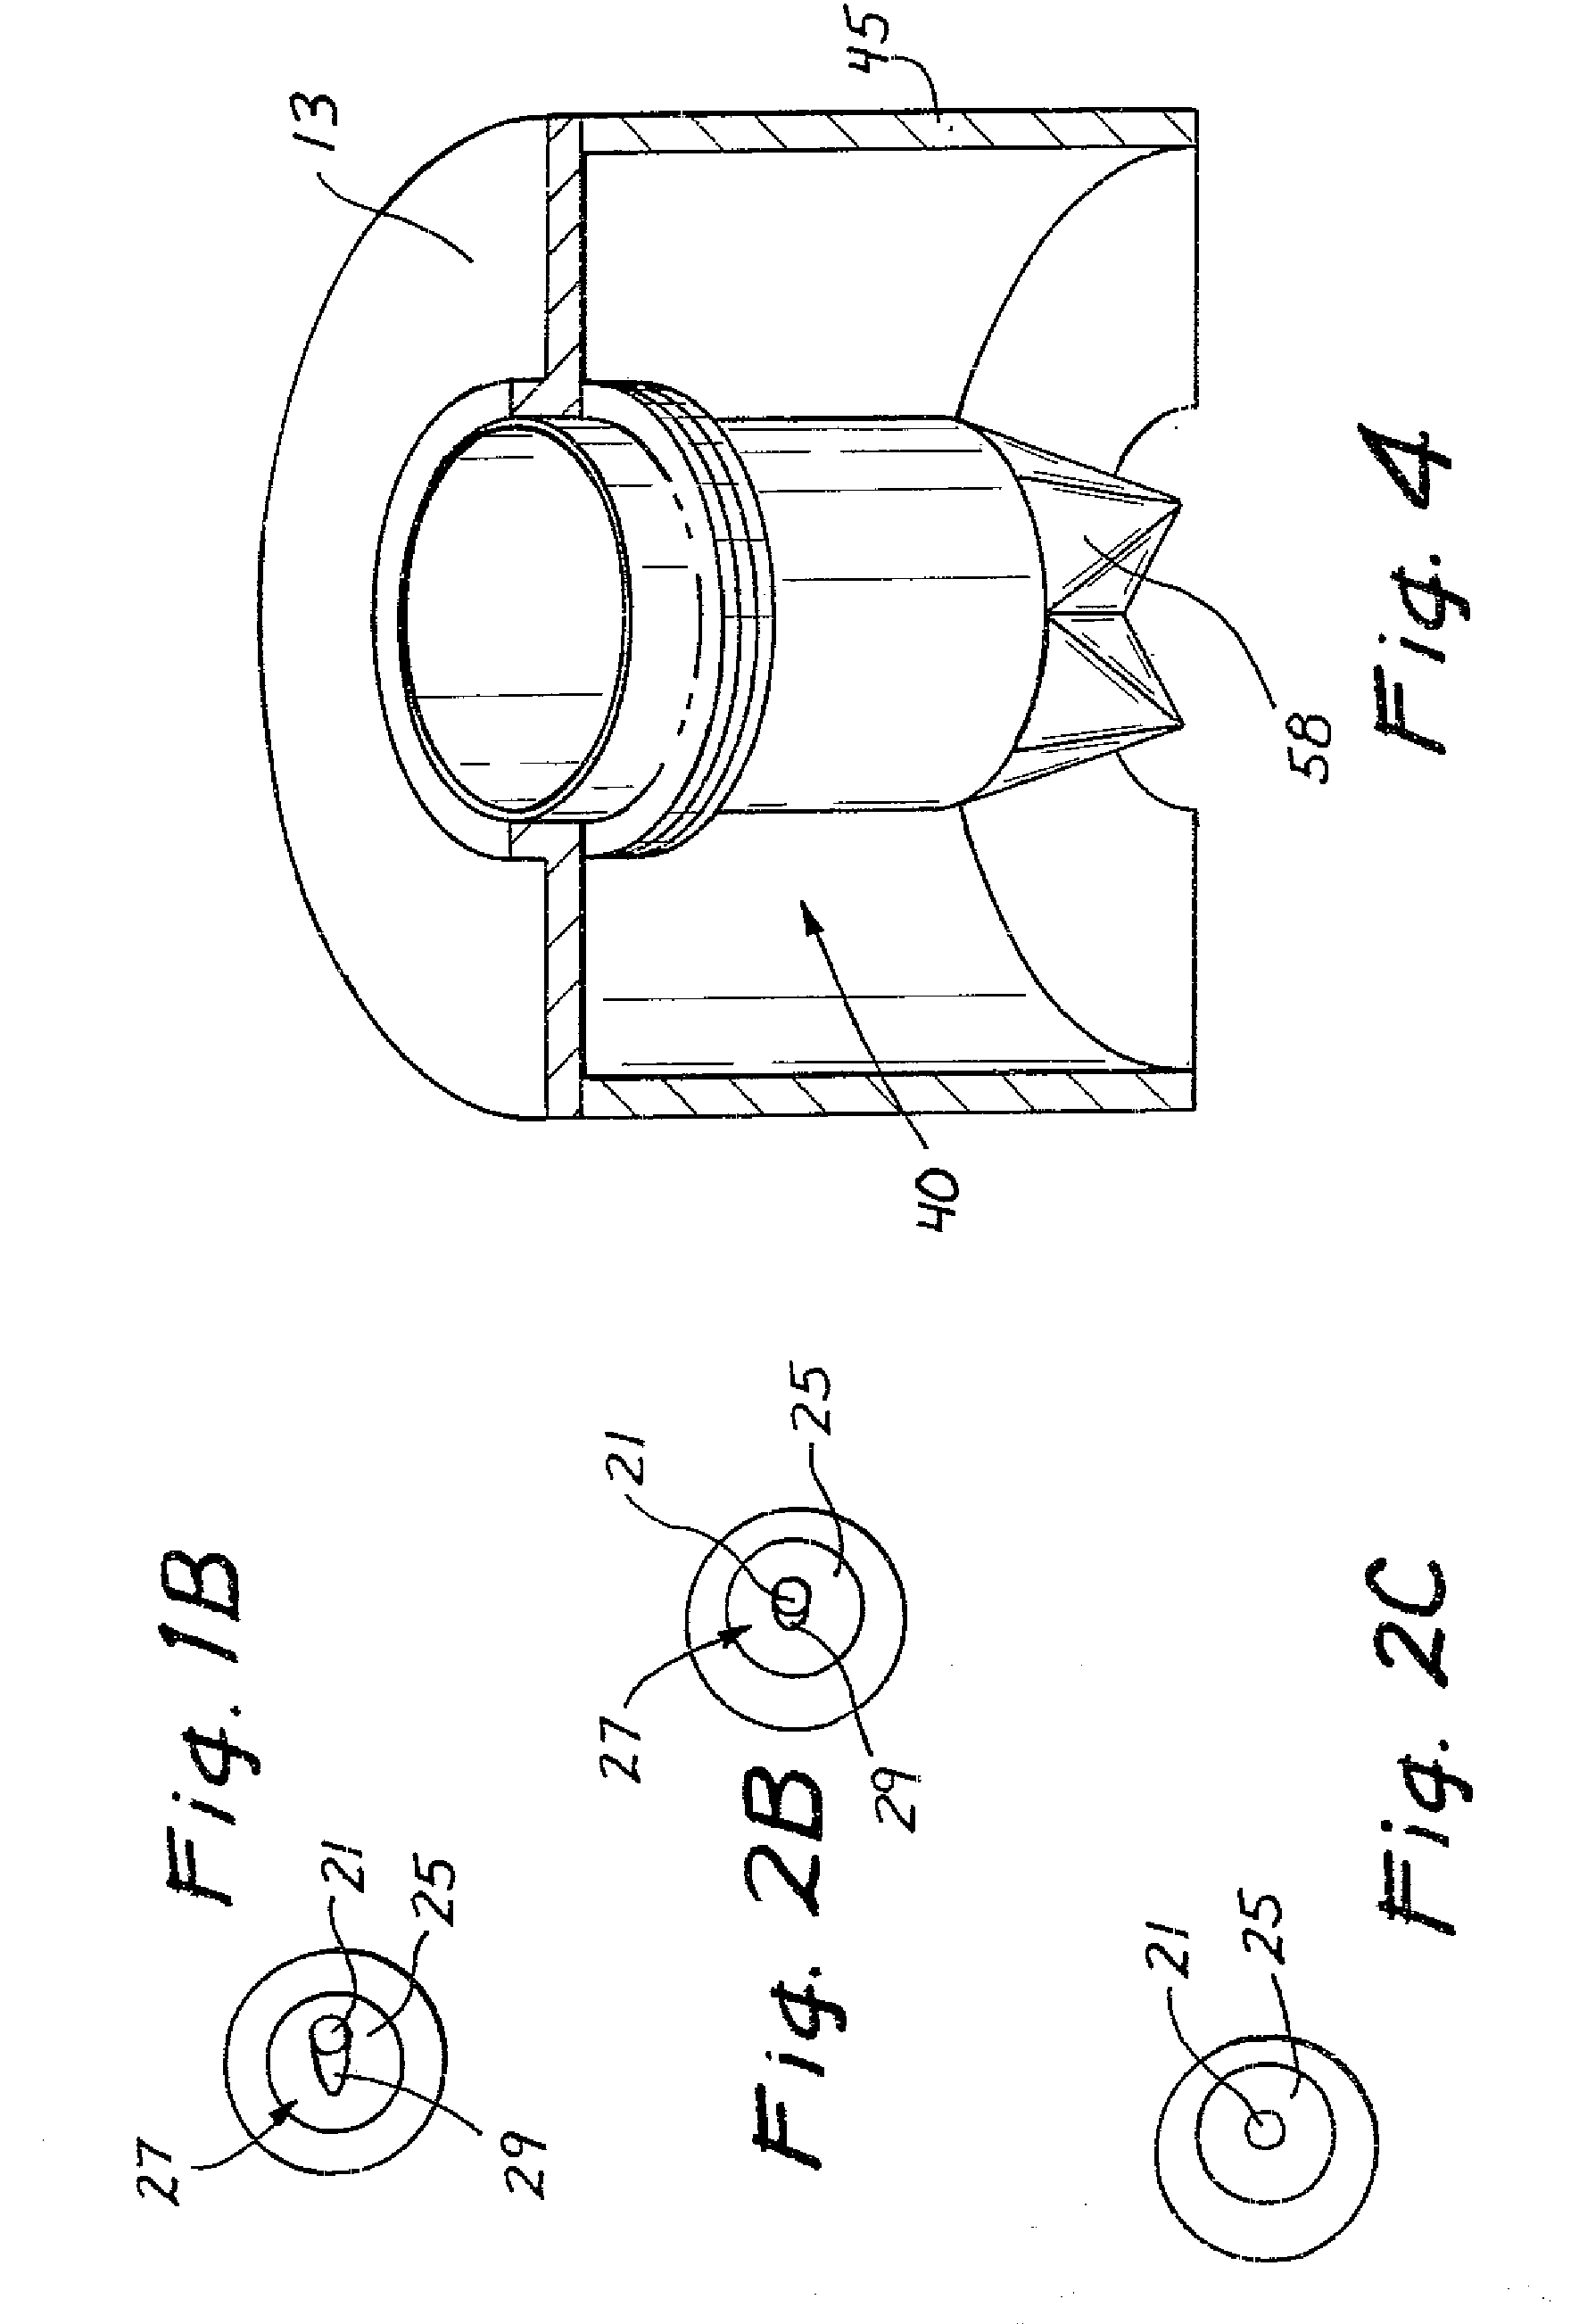 Surgical access device with pendent valve